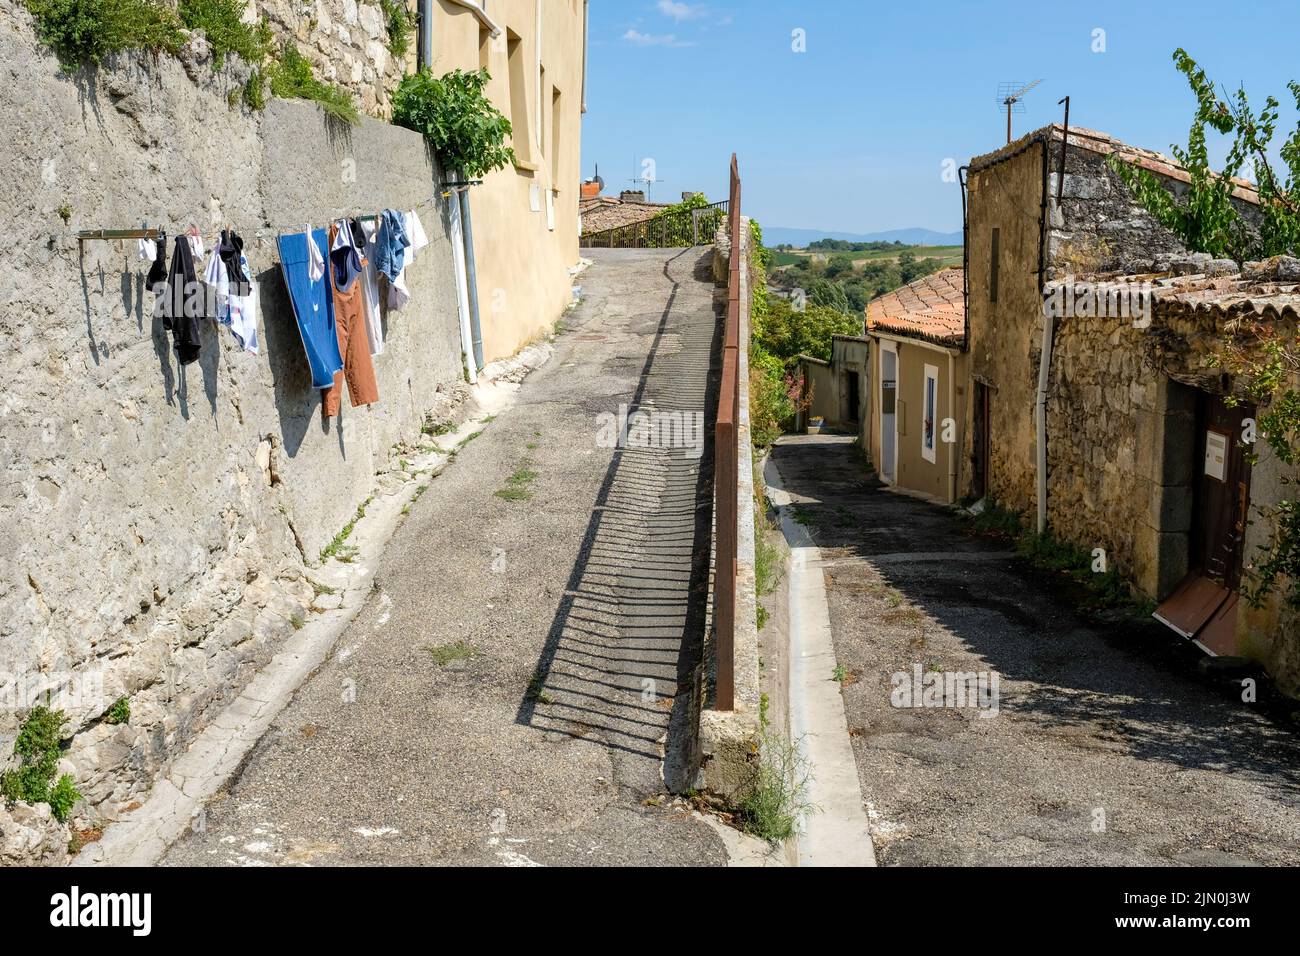 Washing dries on a pathway in the ancient commune of Aragon in South-East France. Stock Photo